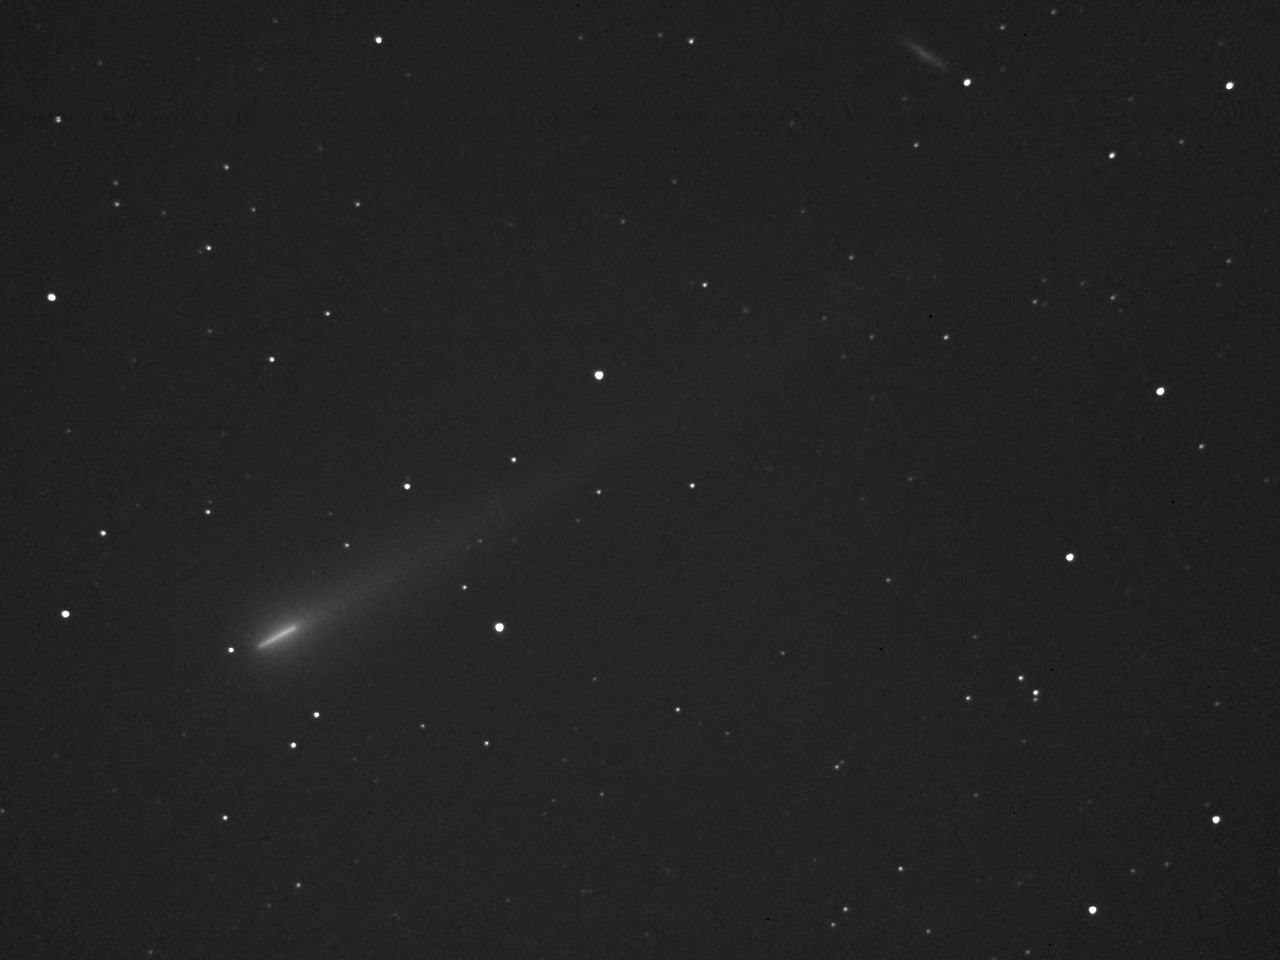 ISON 31.10.13 a